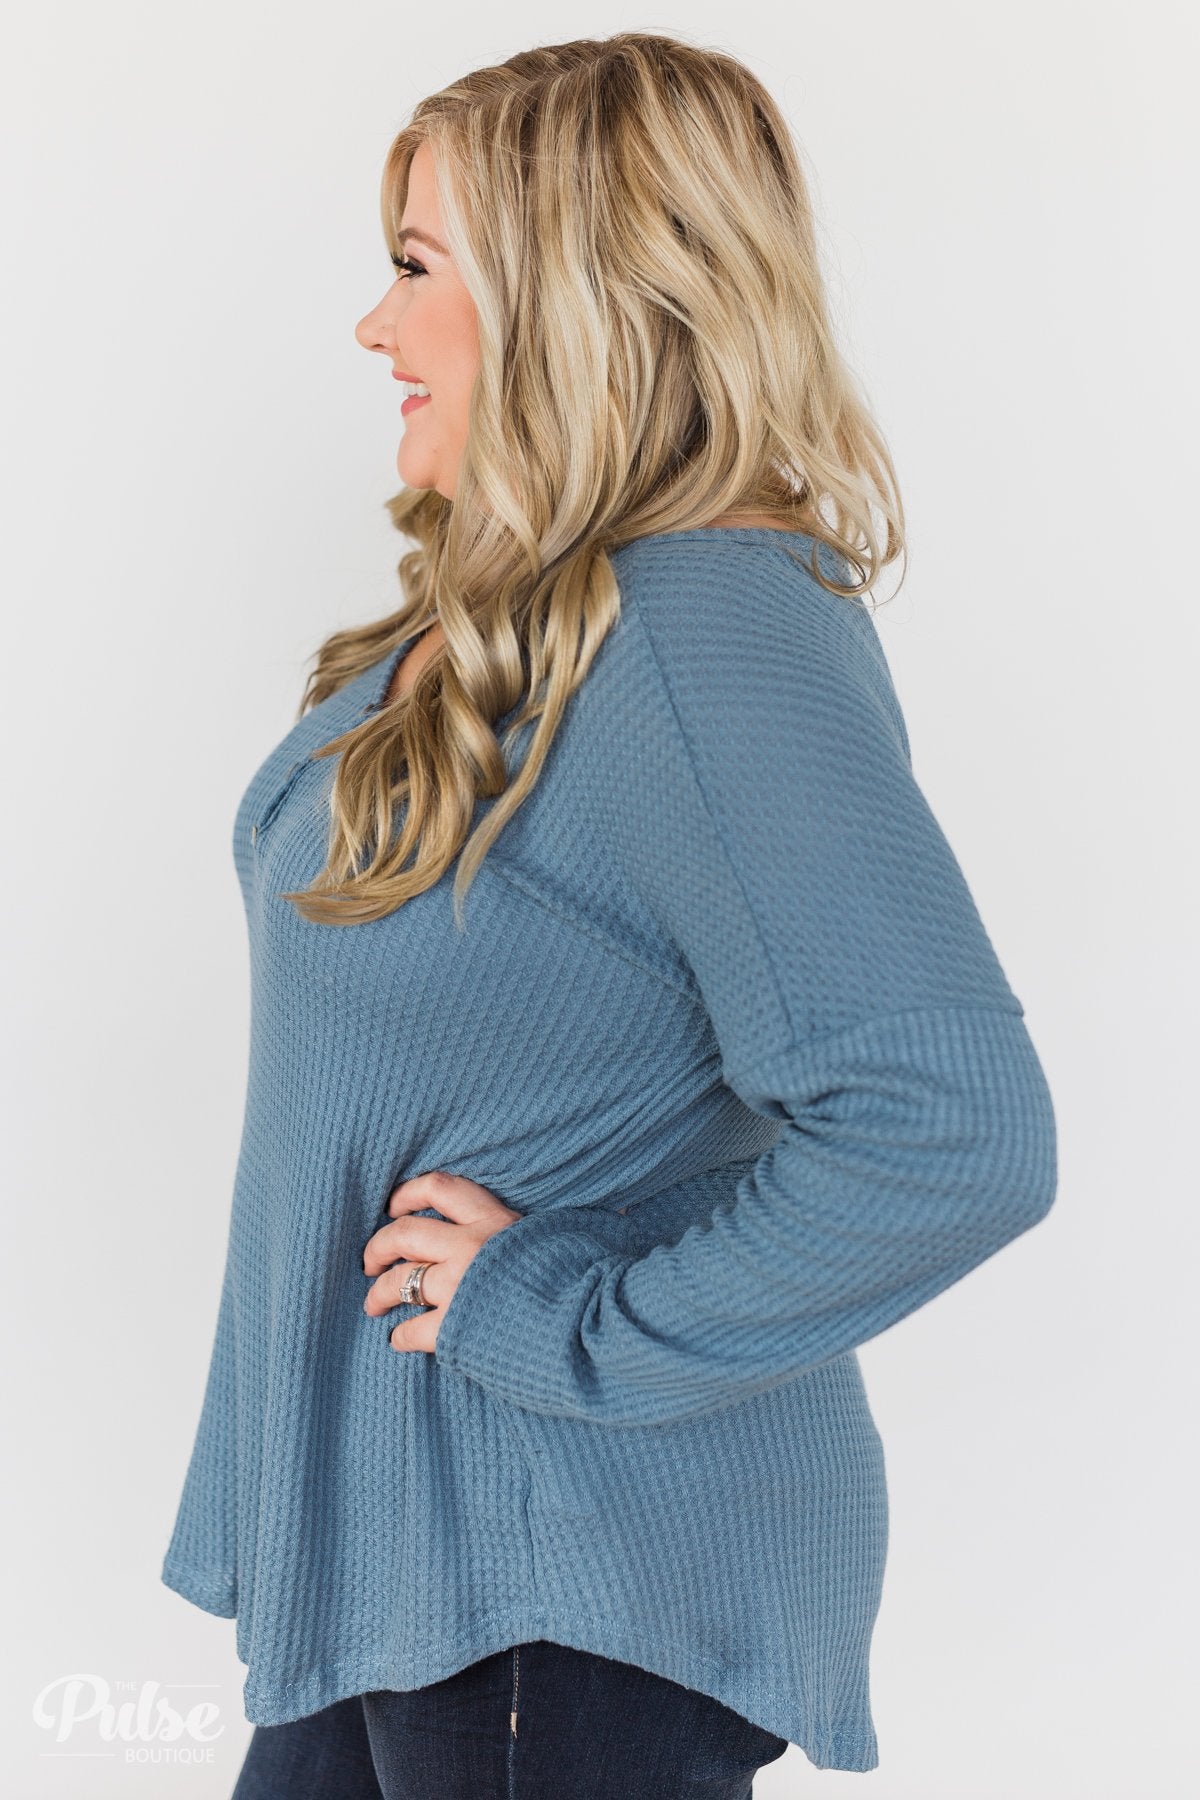 Knowing You V-Neck Thermal Top- Slate Blue